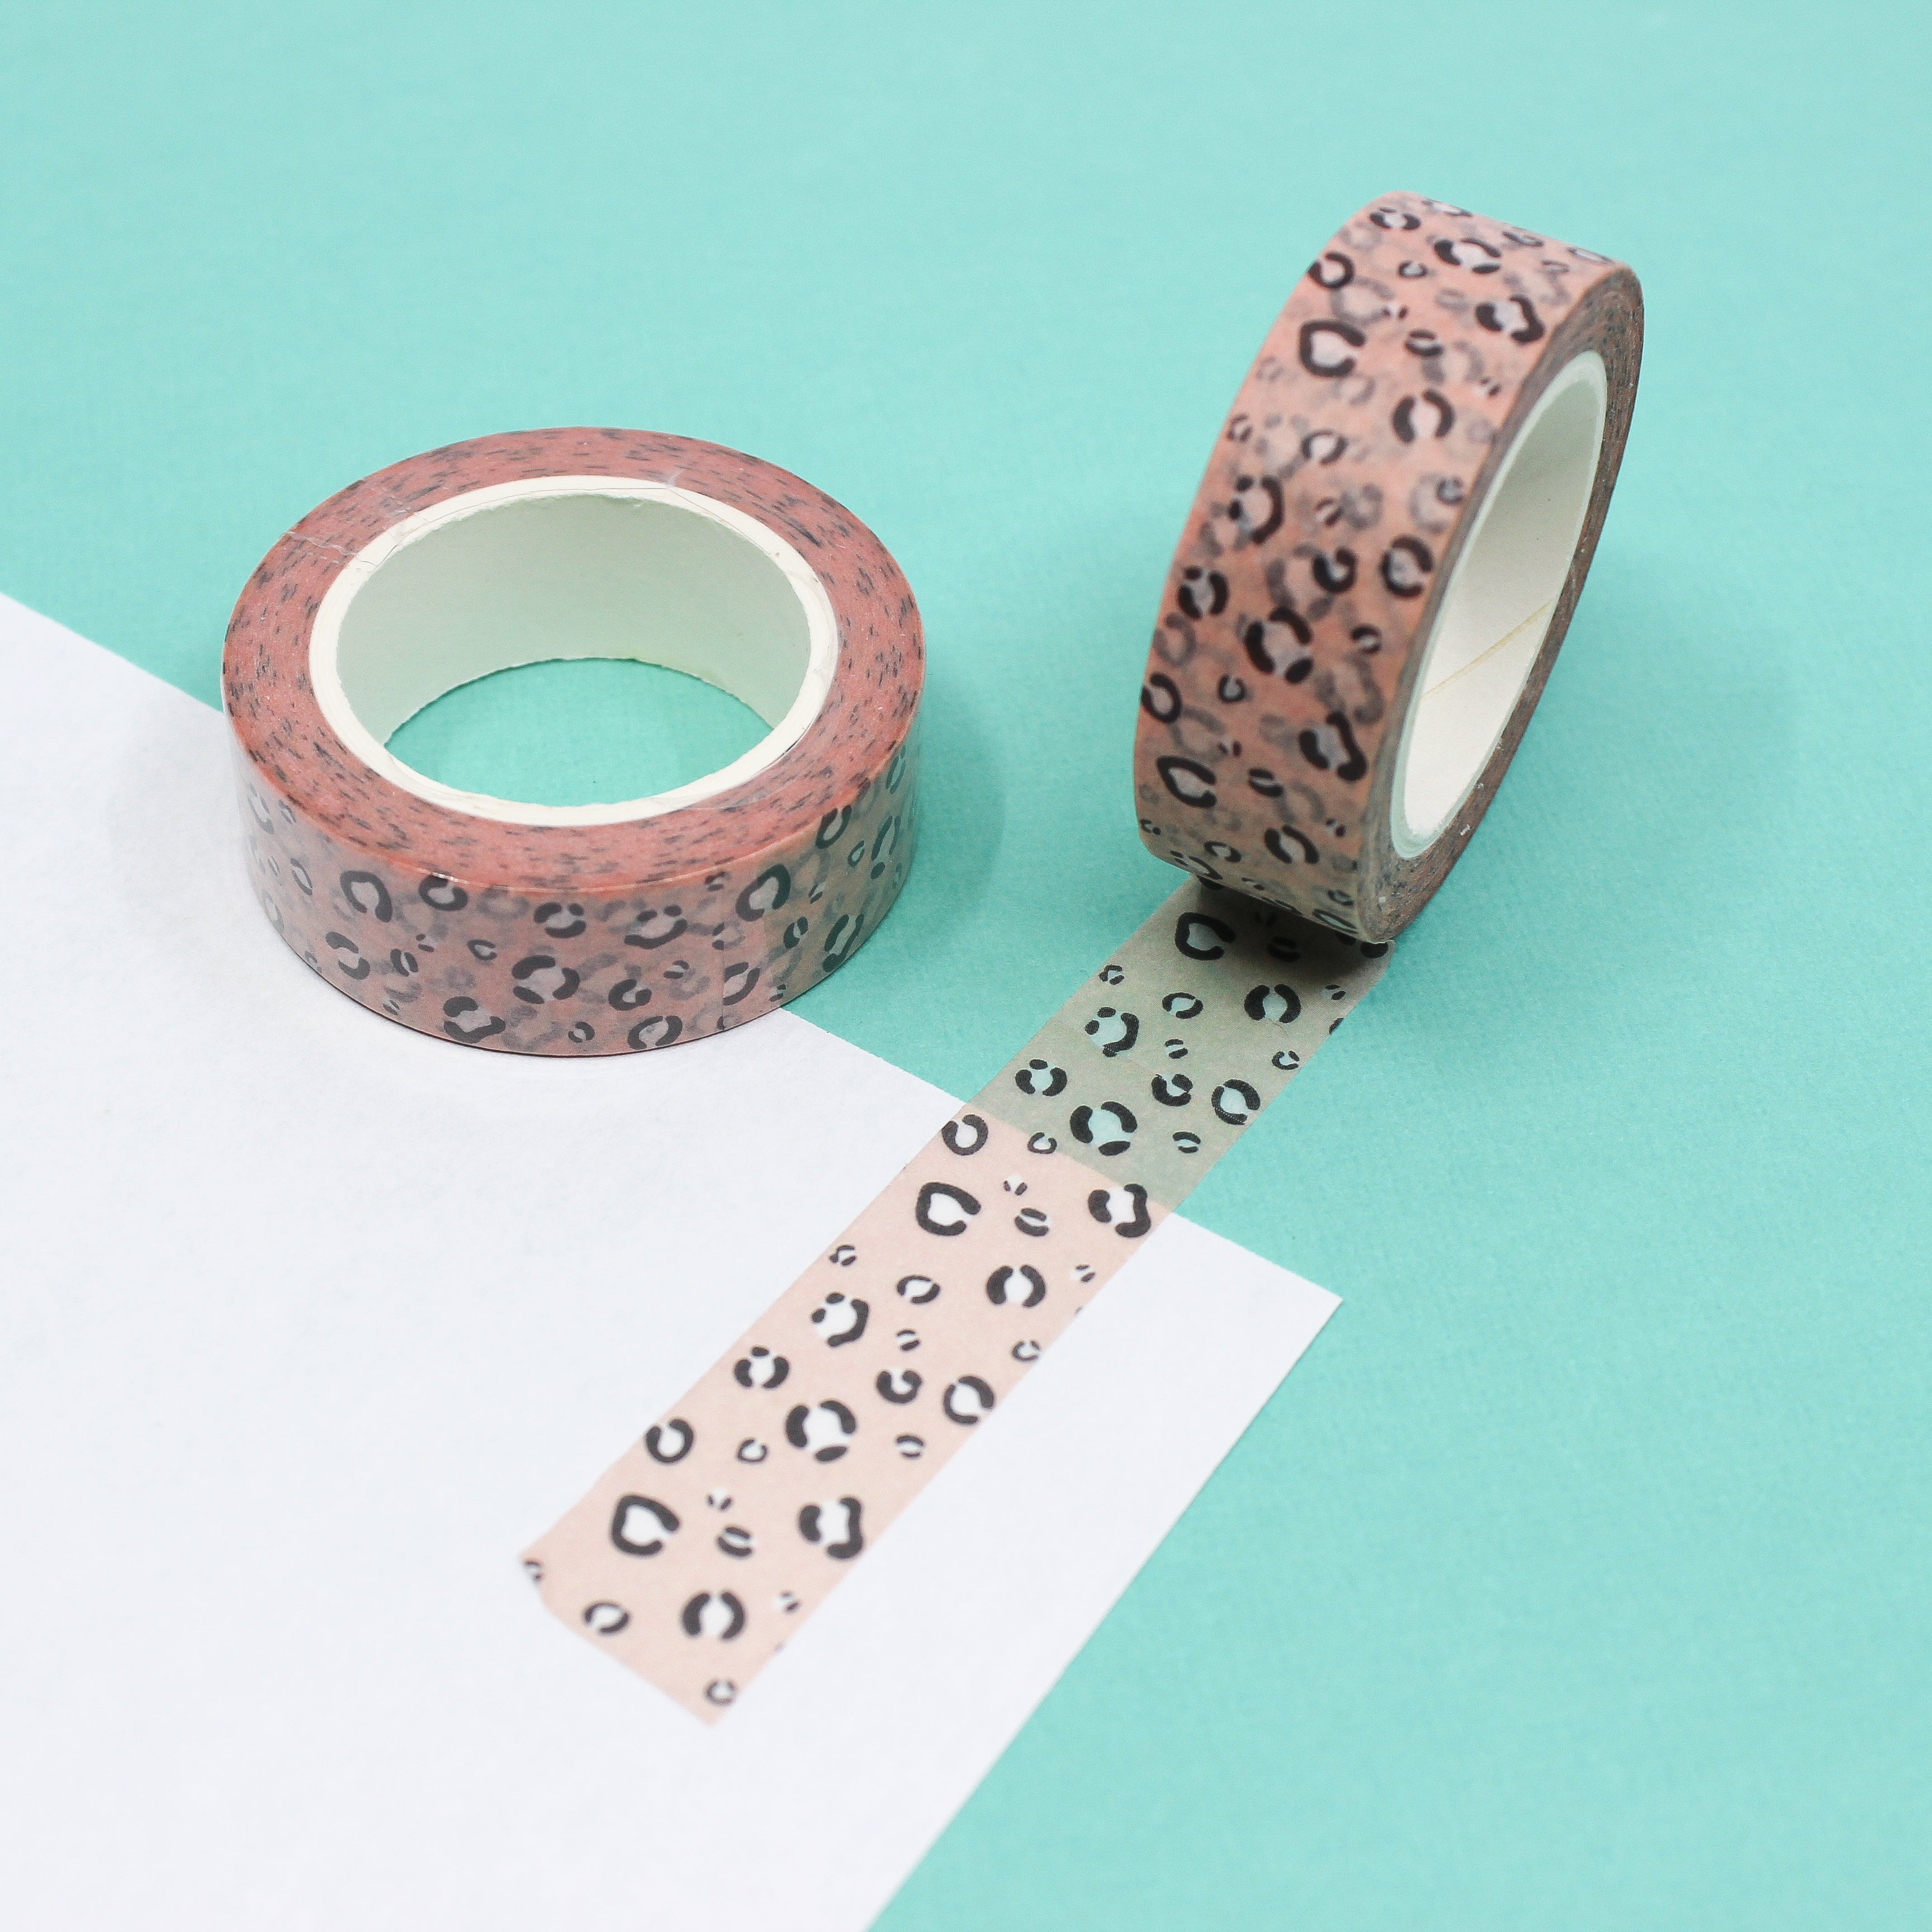 This is a pink leopard animal themed washi tape from BBB Supplies Craft Shop